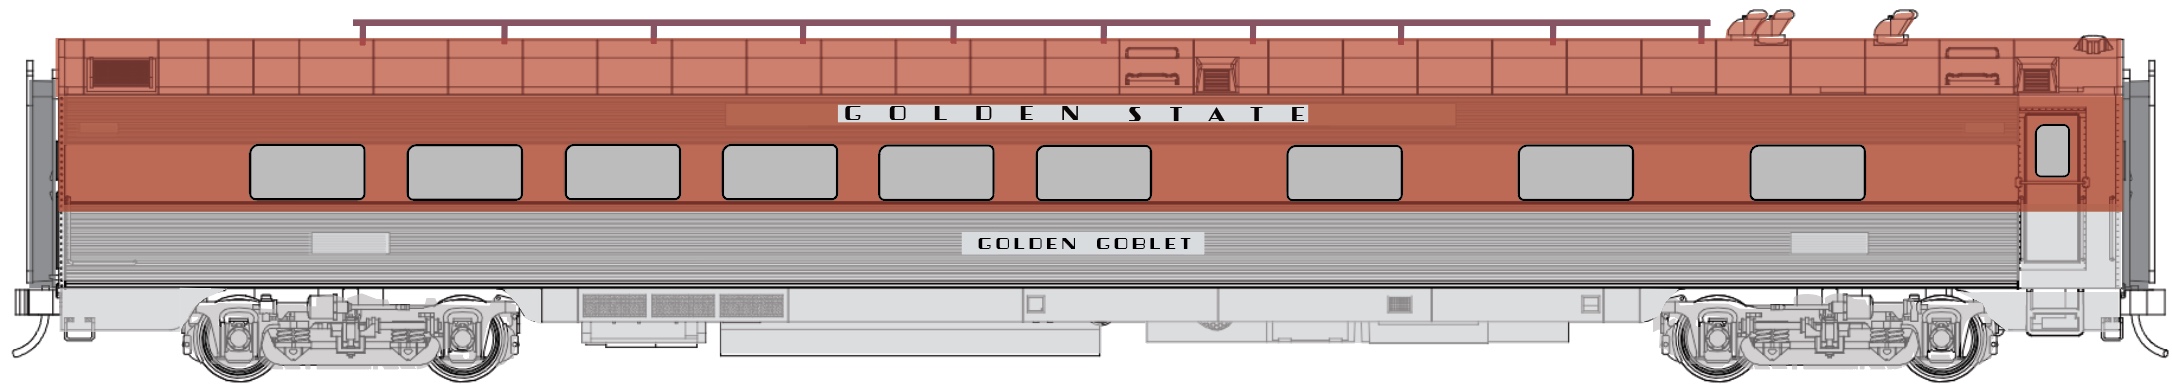 N Scale - RailSmith - 754012 - Passenger Car, Pullman, Fluted, Diner - Southern Pacific - Golden Goblet